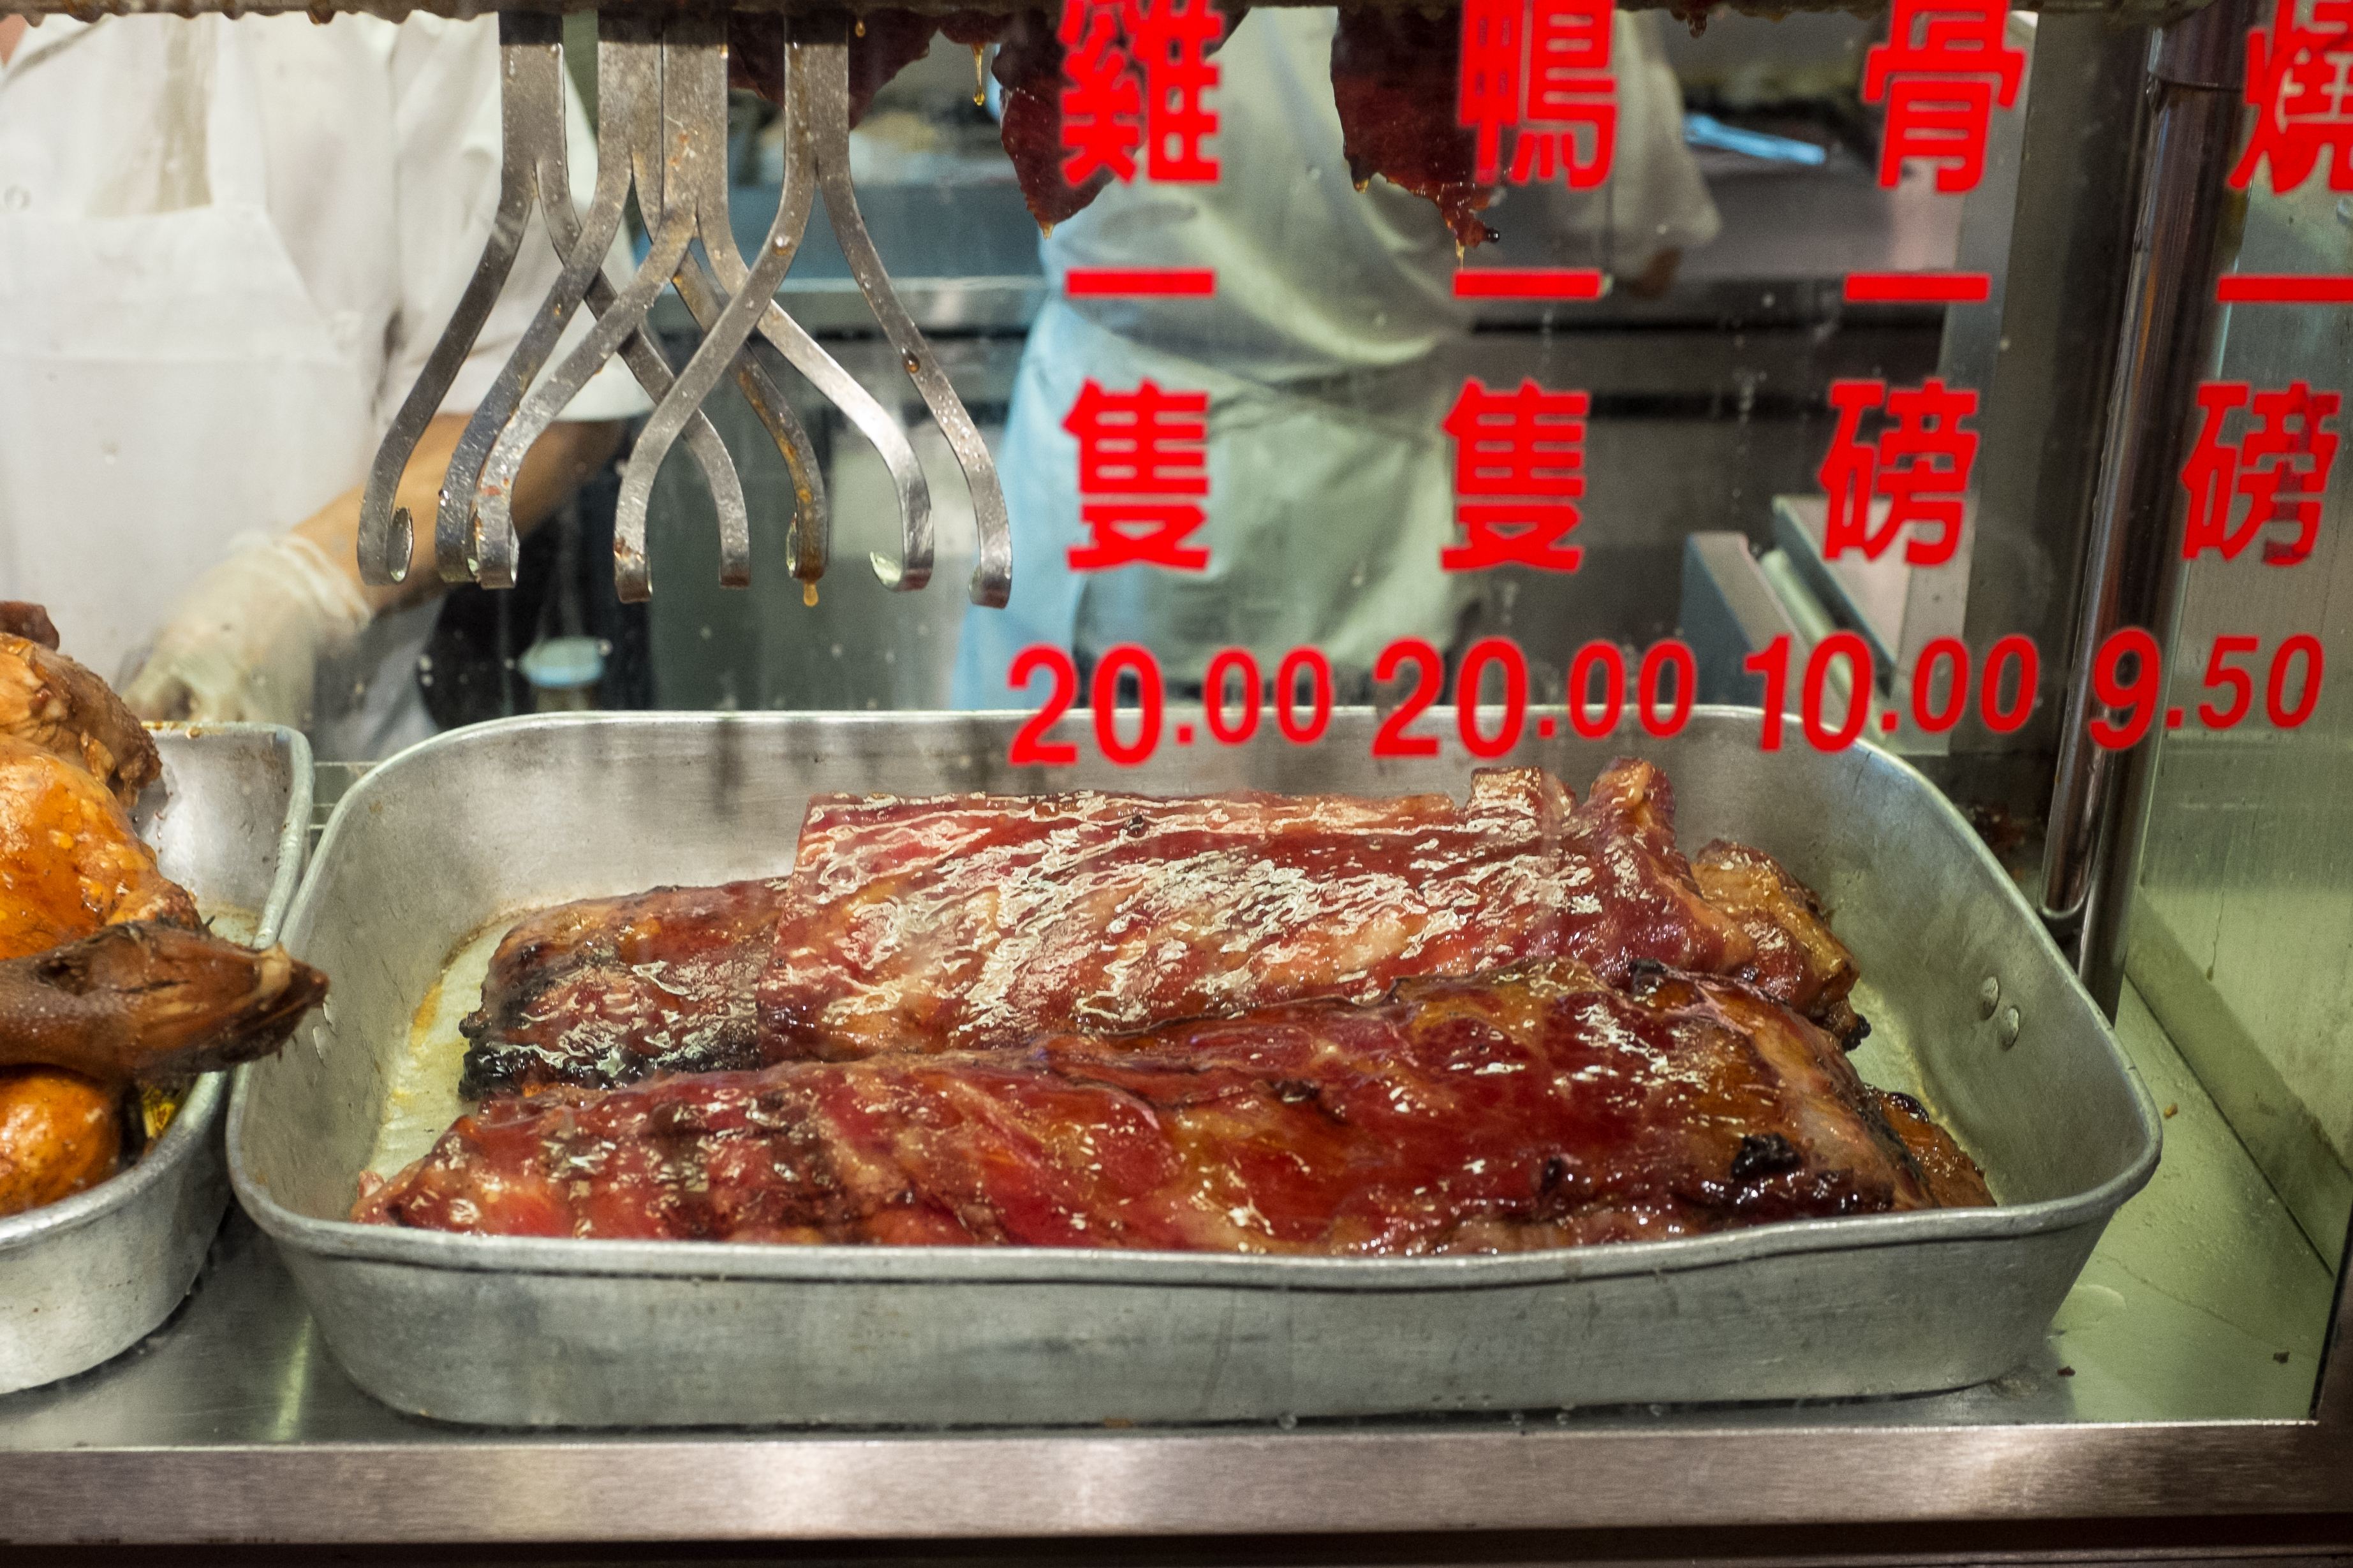 Ribs gleam in the window of a Chinatown restaurant, Big Wong, next to prices marked on the window in rent letters.